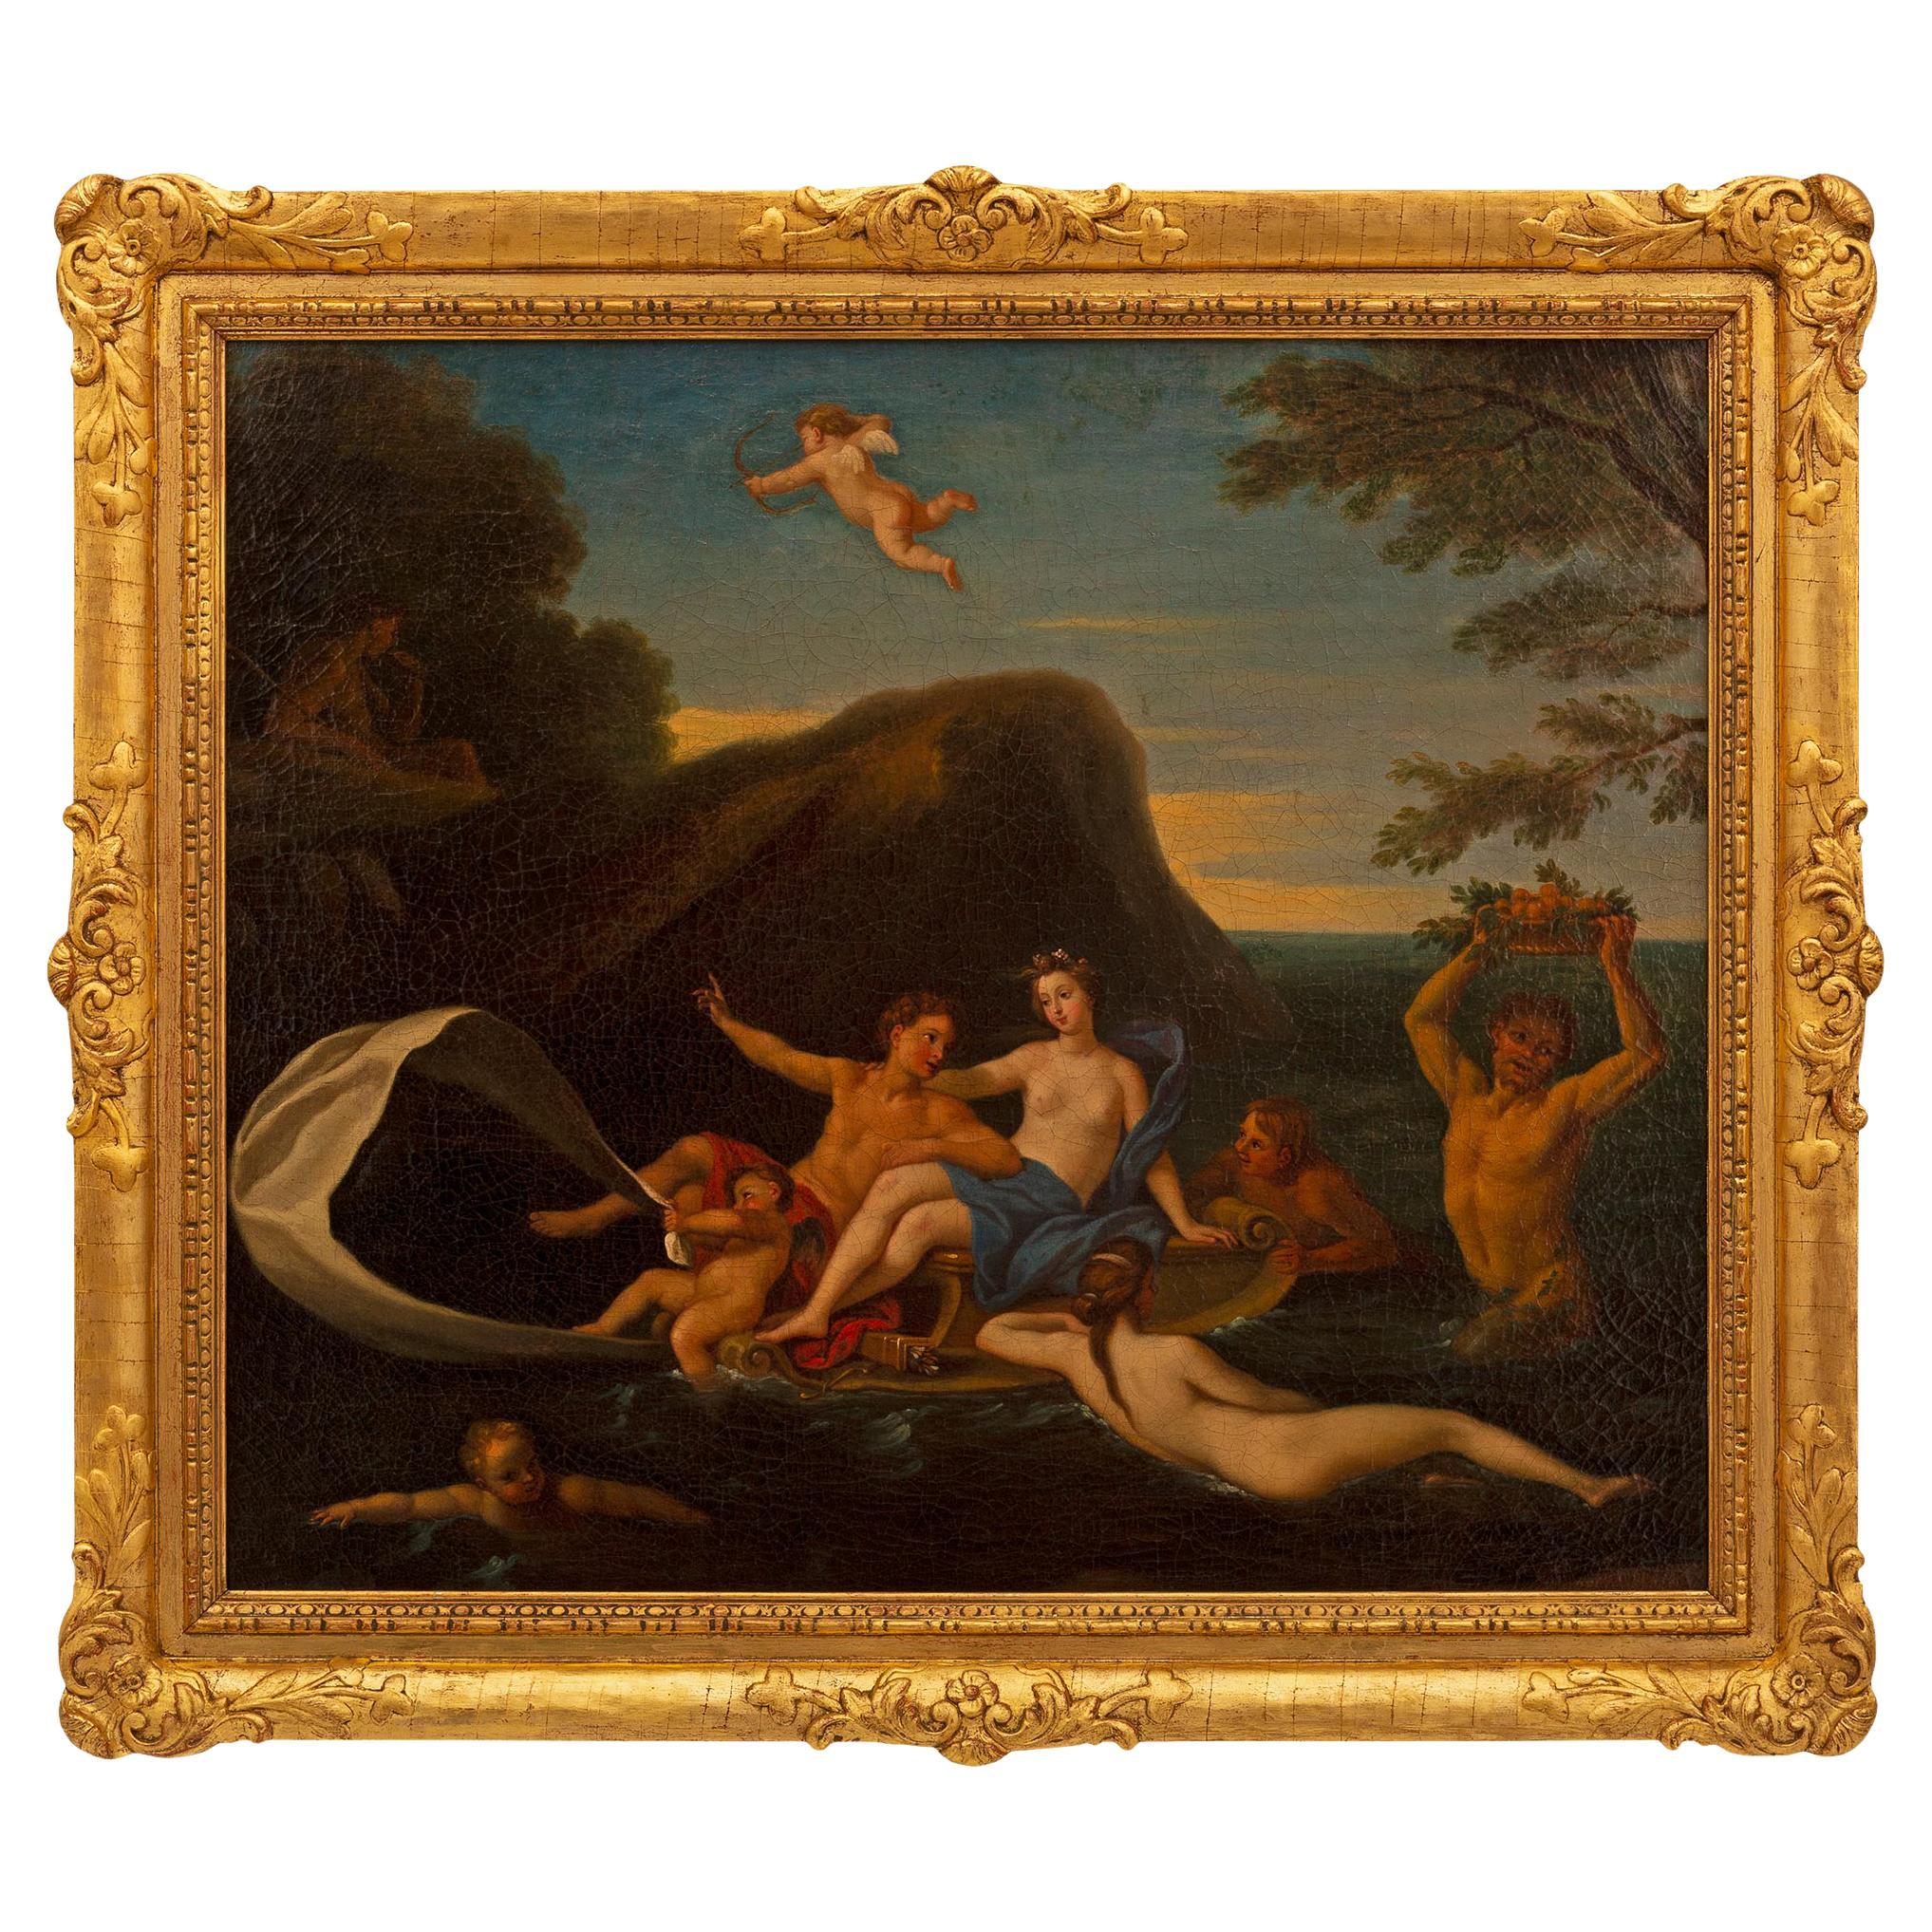 Continental 19th Century Oil On Canvas Painting In Its Original Giltwood Frame